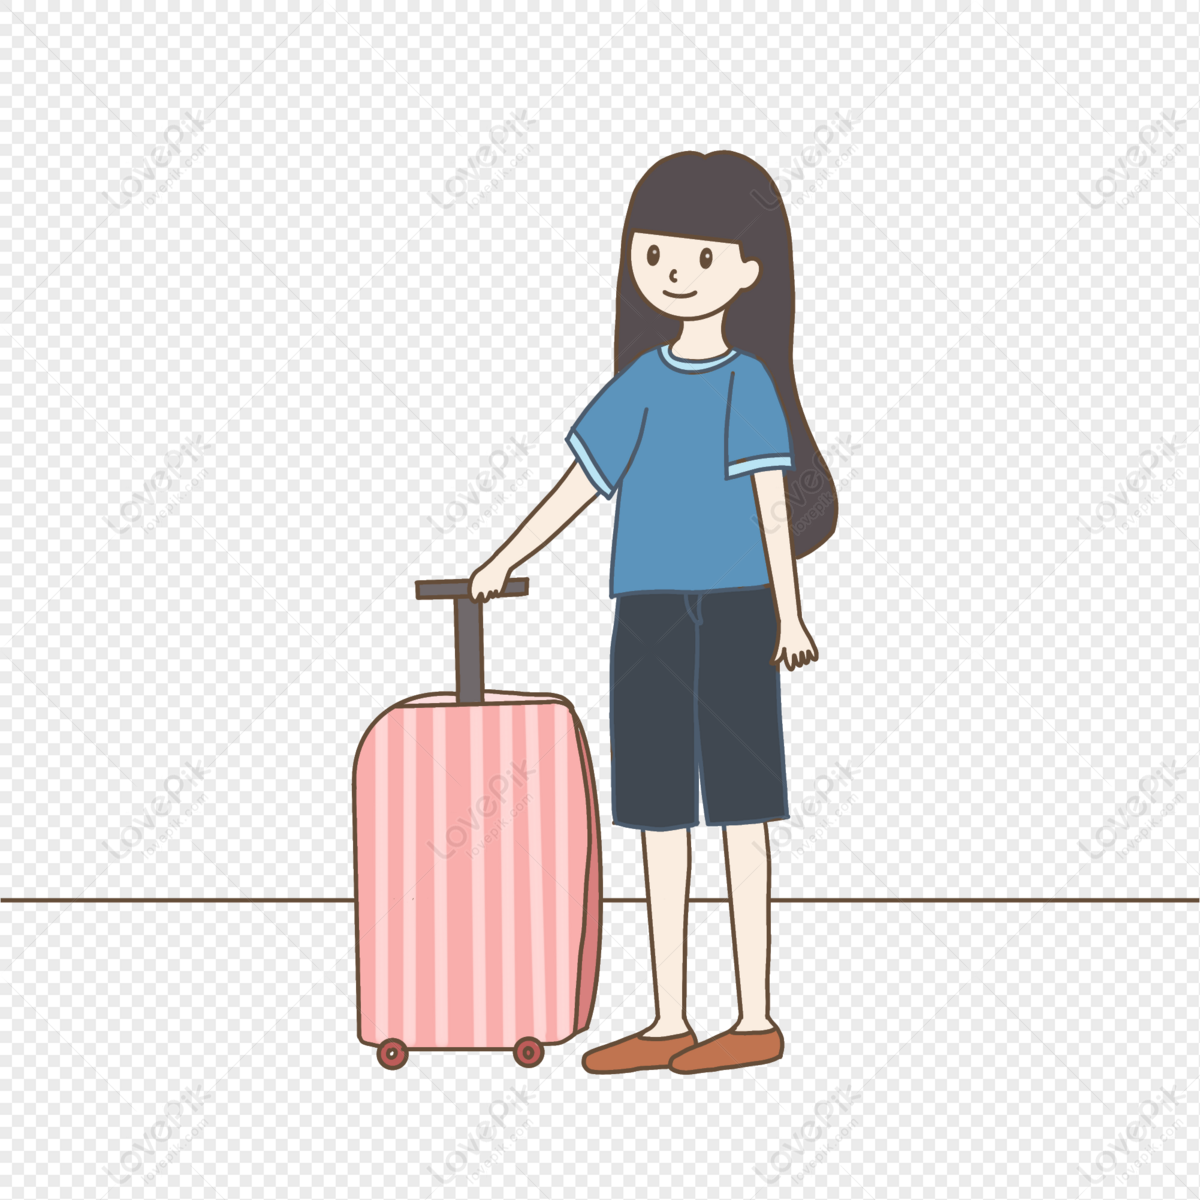 Girls In The Graduation Season Who Are Carrying Luggage And Stan PNG  Transparent Background And Clipart Image For Free Download - Lovepik |  401337700